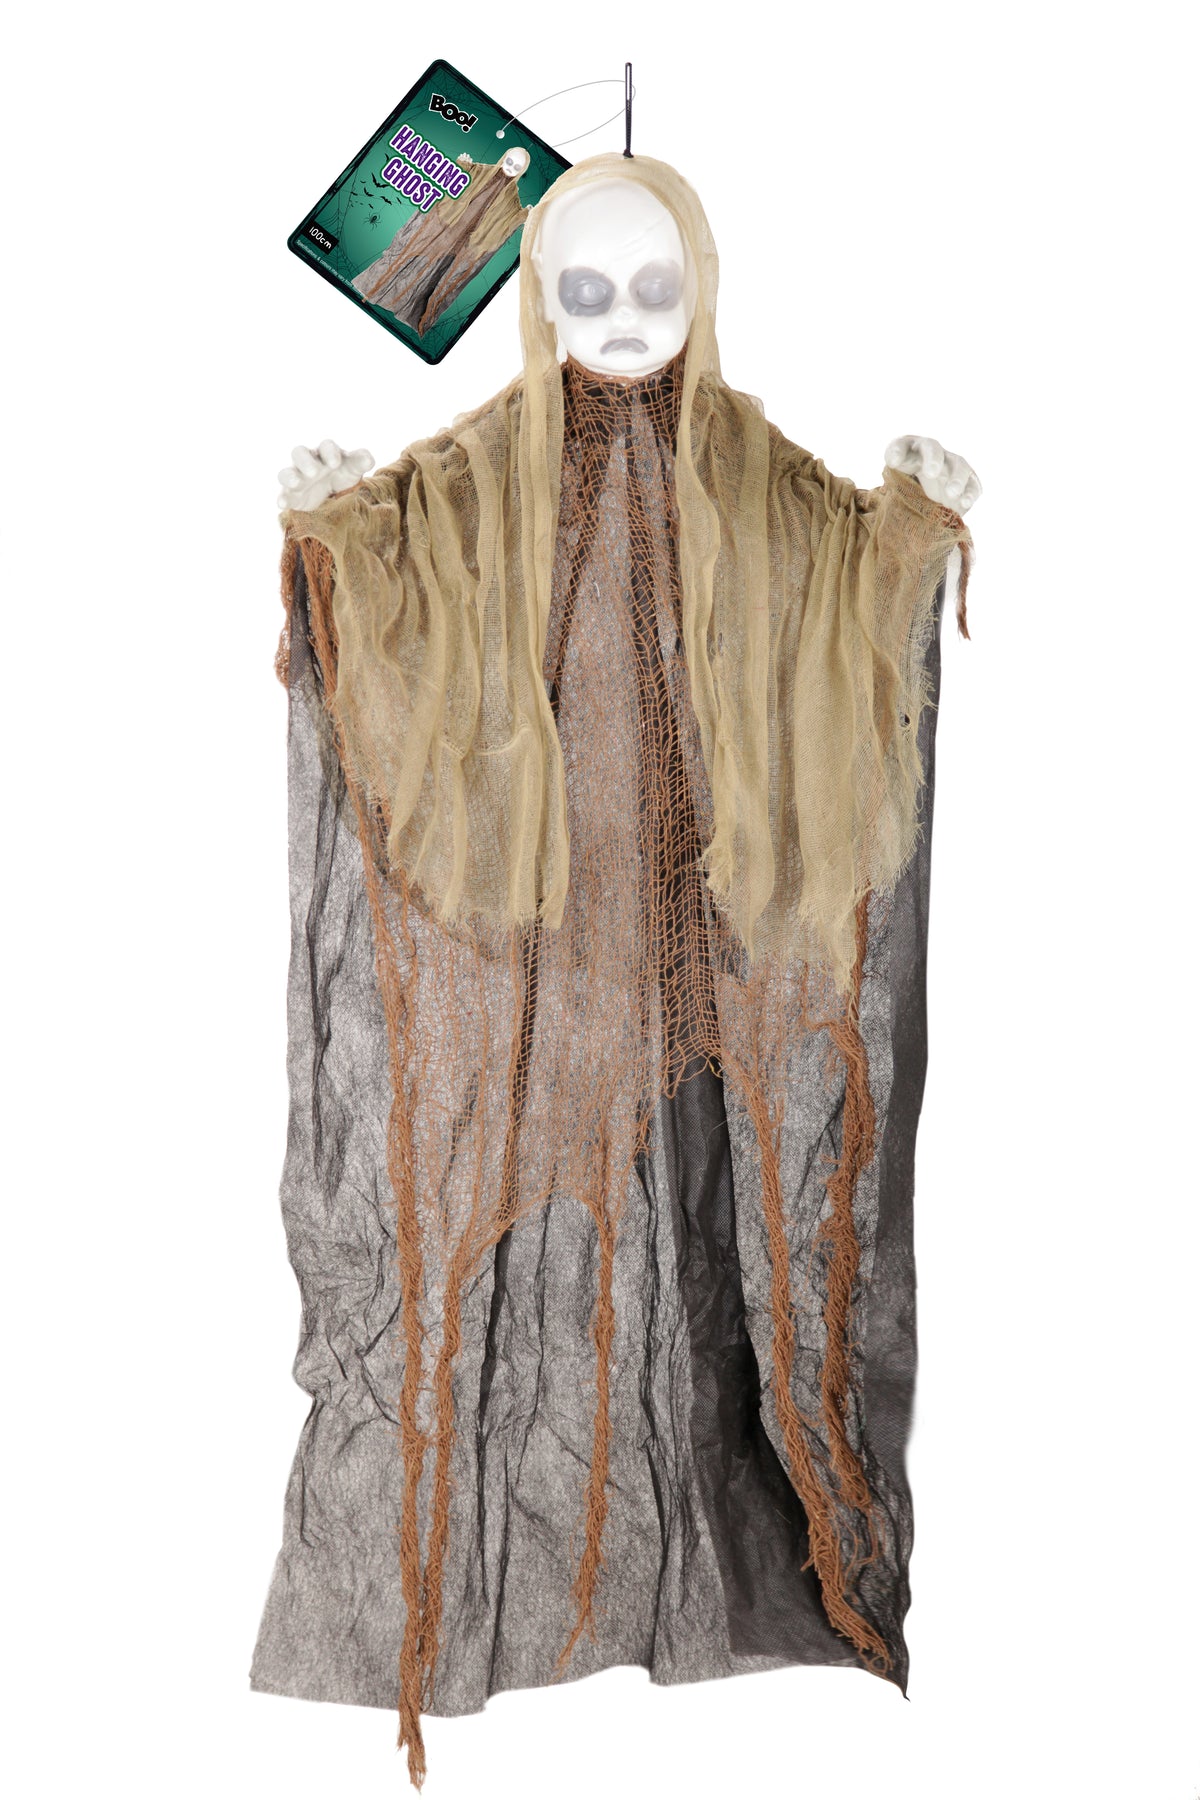 Boo! Hanging Child Ghost Decoration in Draped Clothes | 100cm